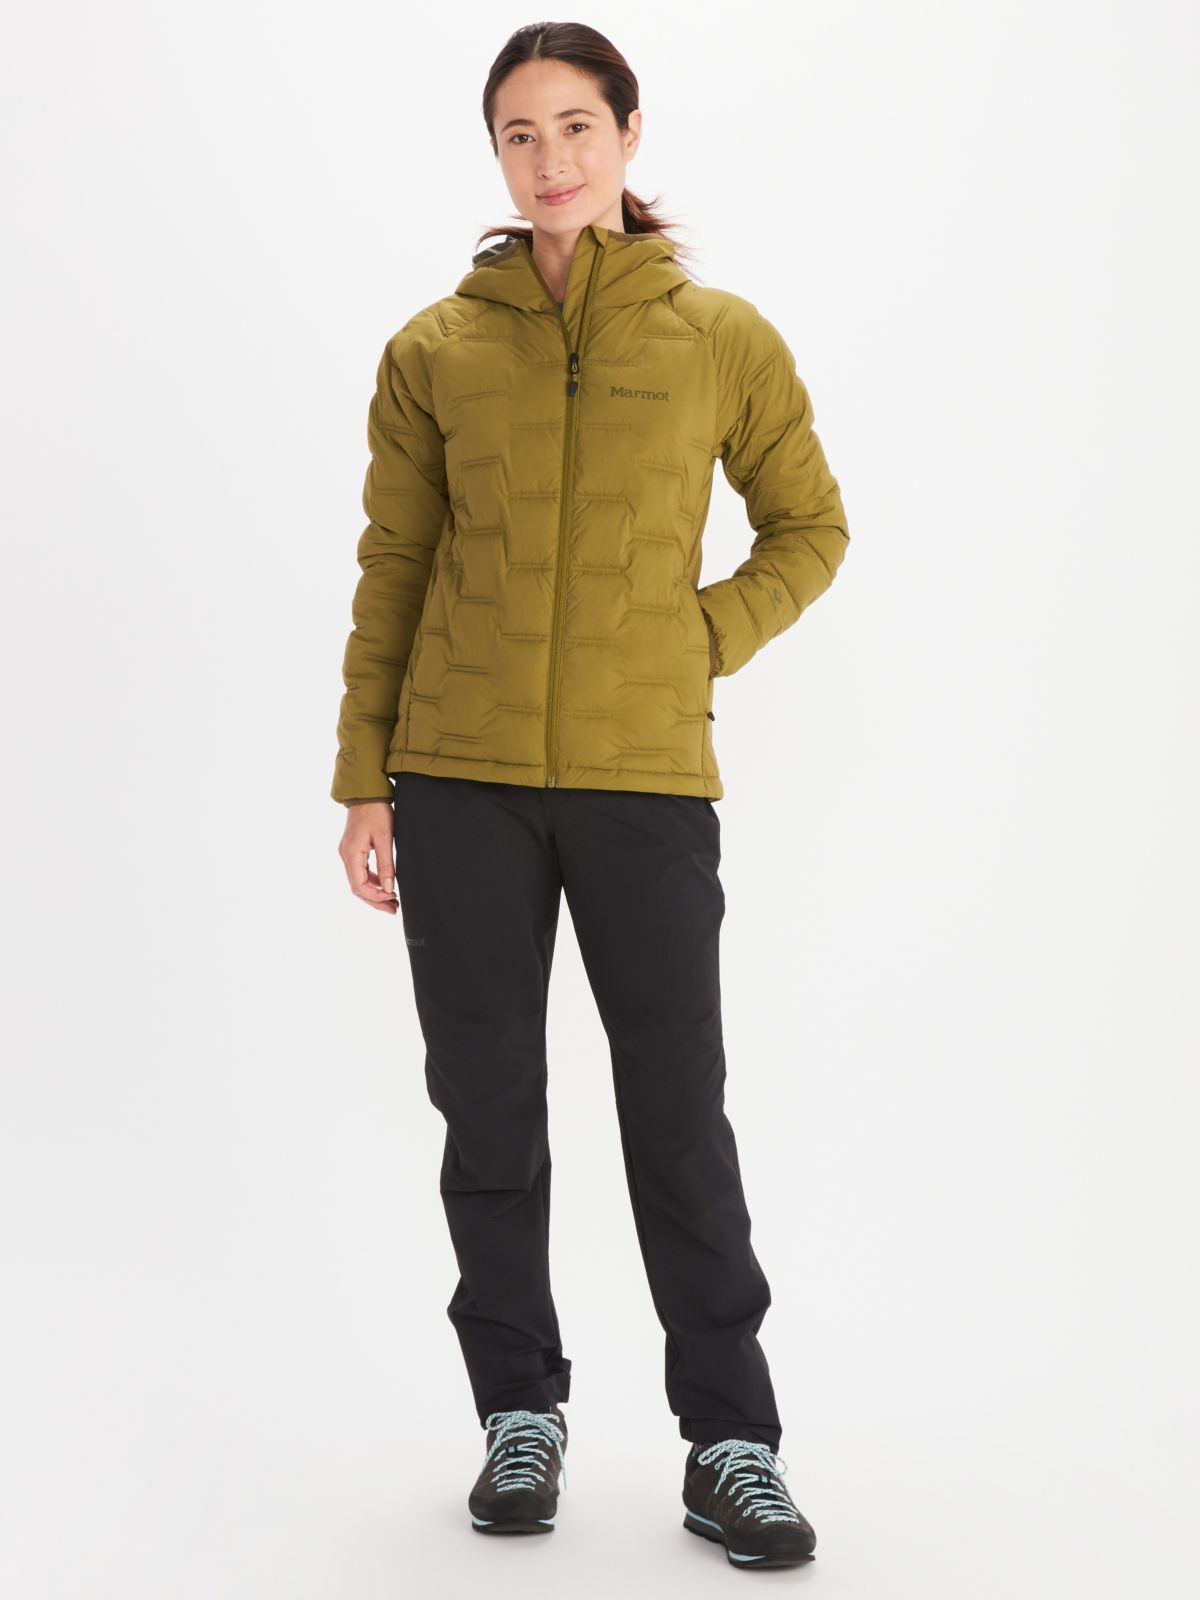 model wearing women's quilted jacket and hiking pants